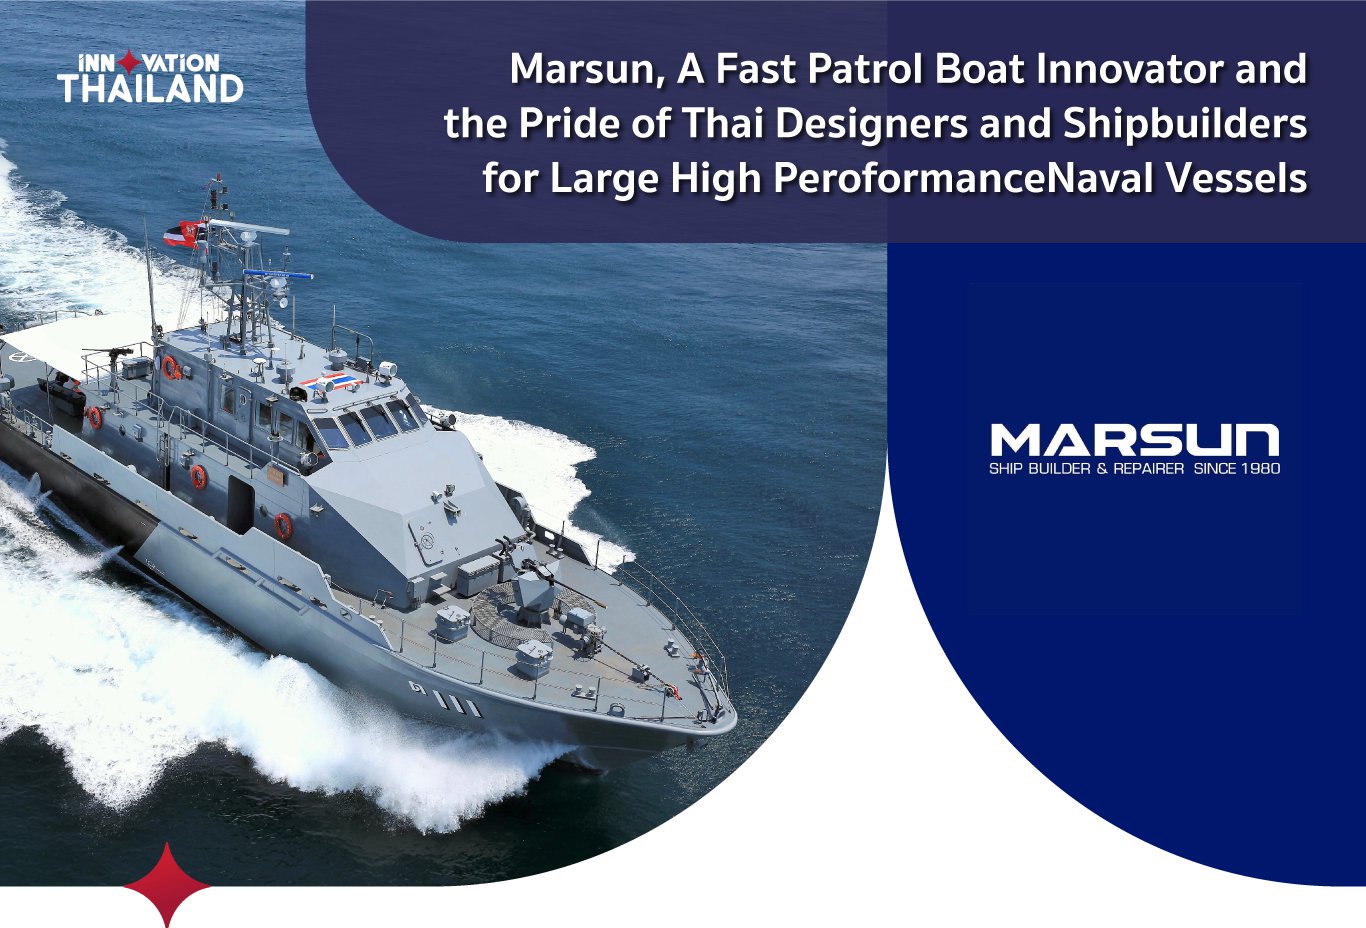 Marsun, A Fast Patrol Boat Innovator and the Pride of Thai Designers and Shipbuilders for Large High PeroformanceNaval Vessels